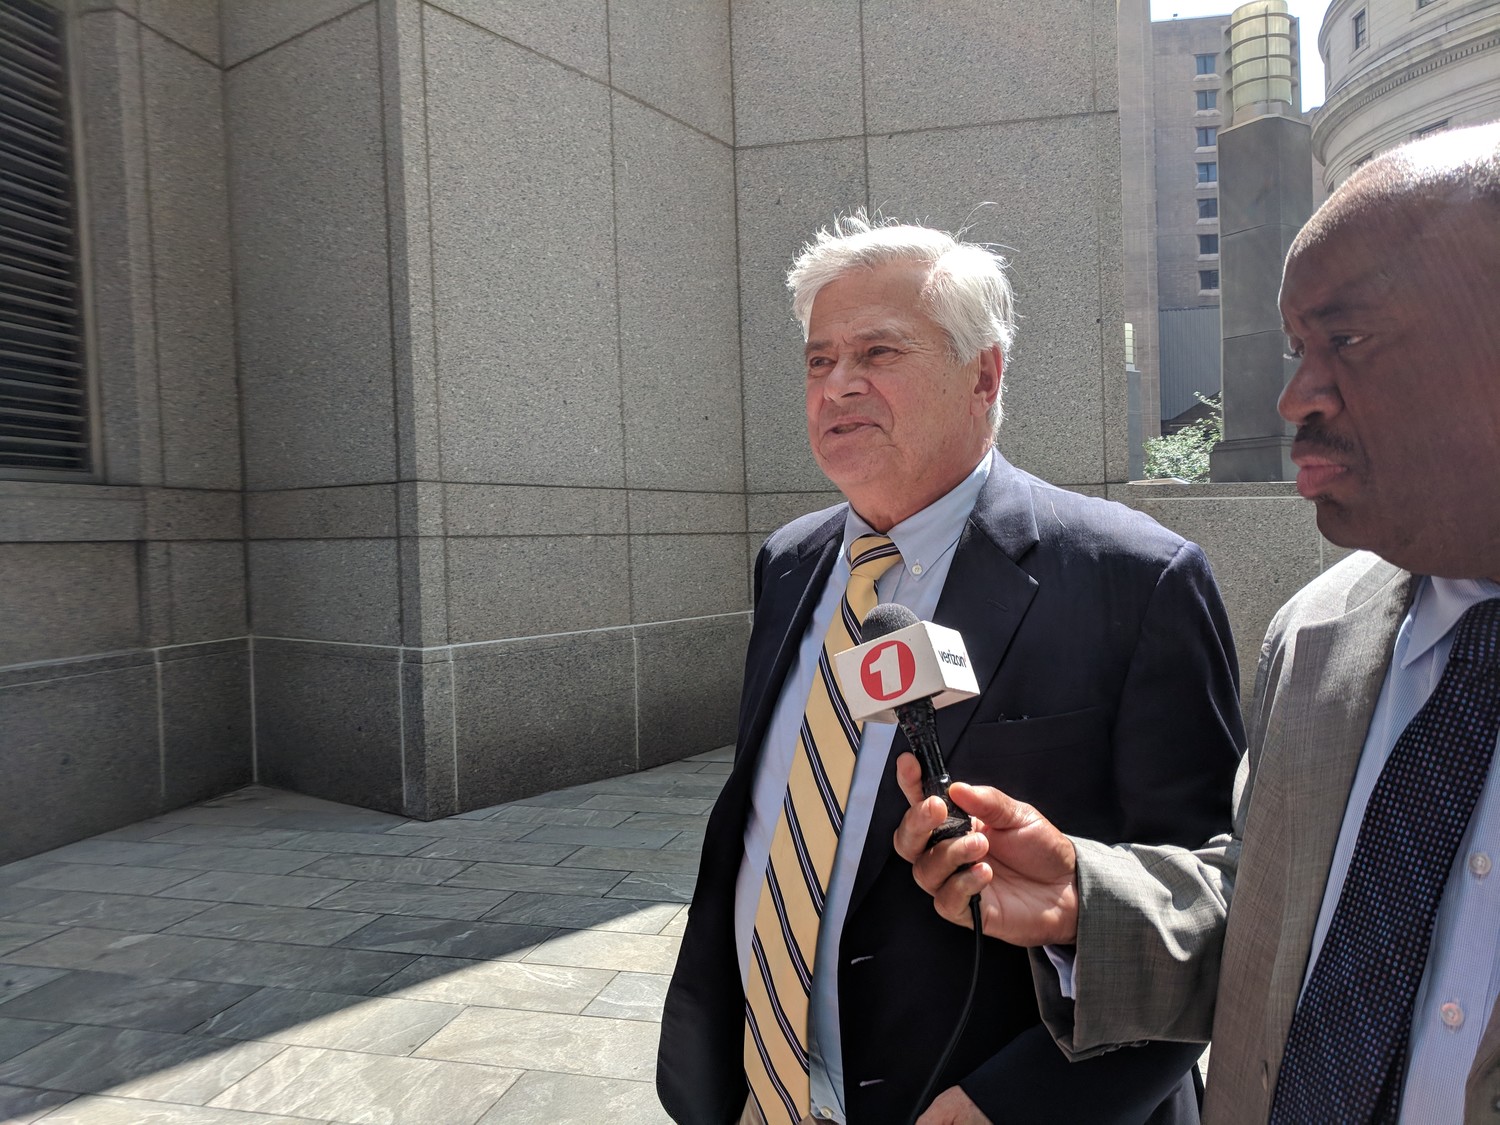 After spending the day in court in Manhattan on June 11, former Senate Majority Leader Dean Skelos told reporters that he was ready for the retrial to be over.